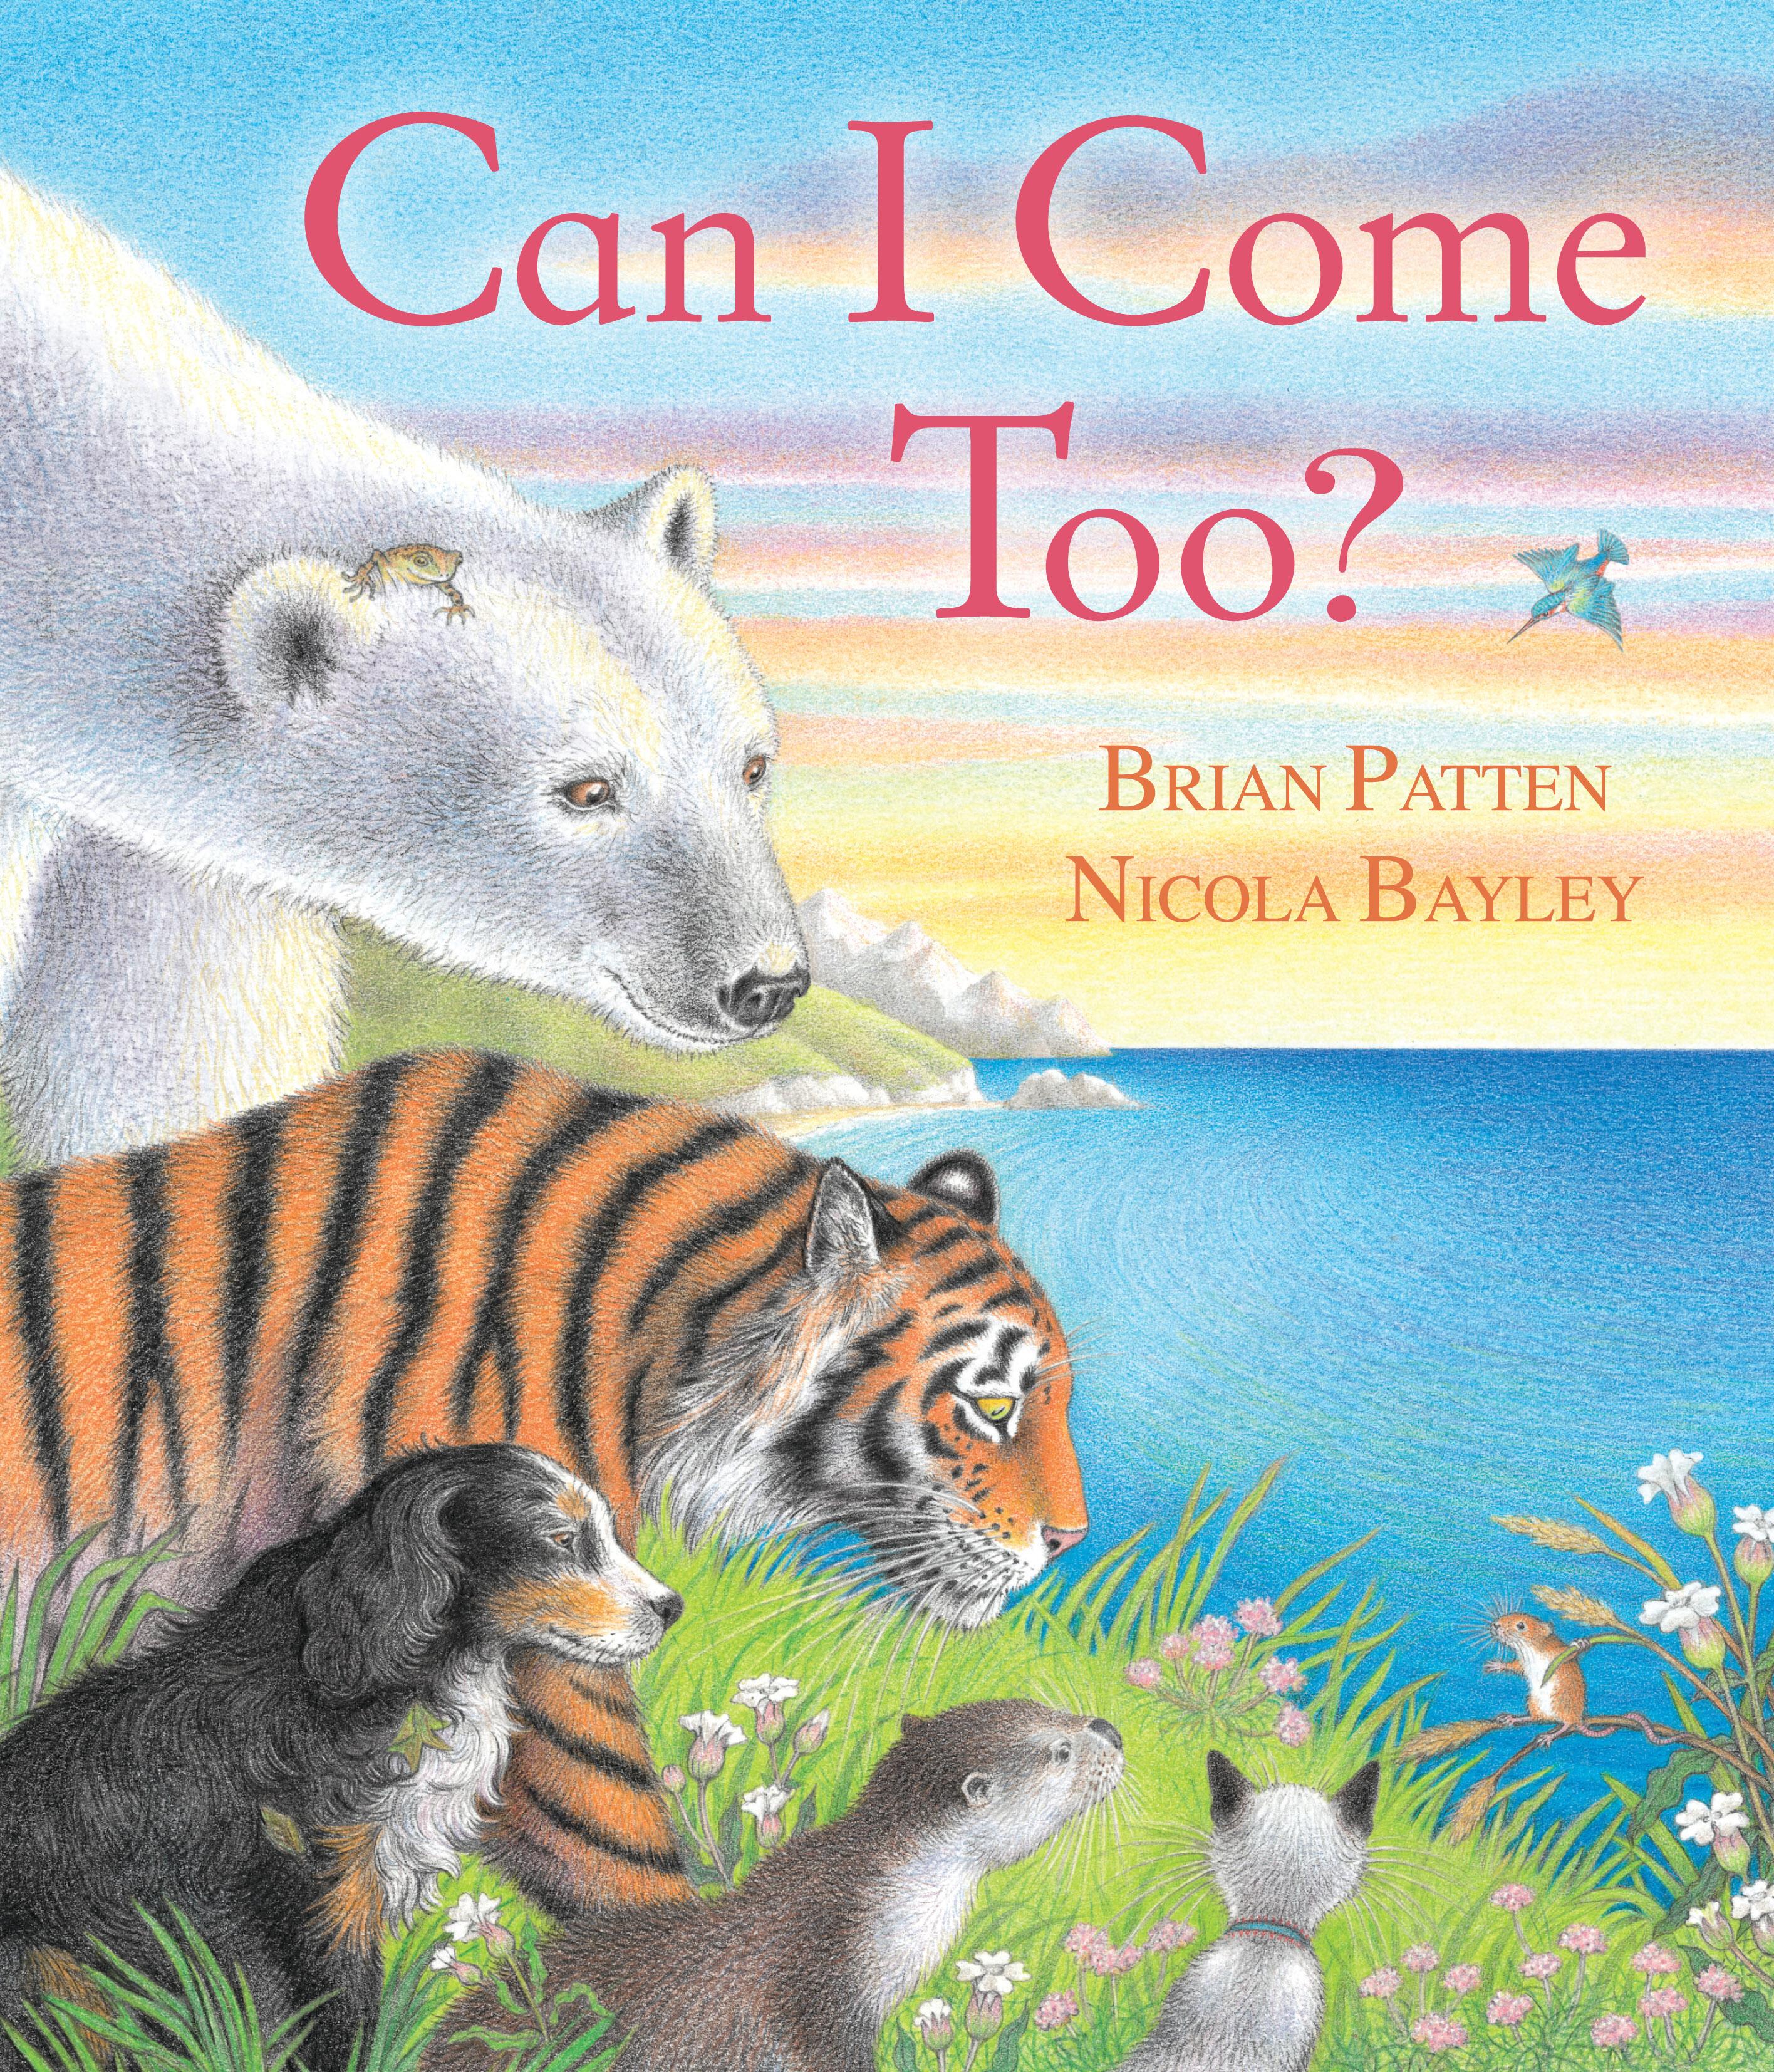 Can I Come Too? - Brian Patten